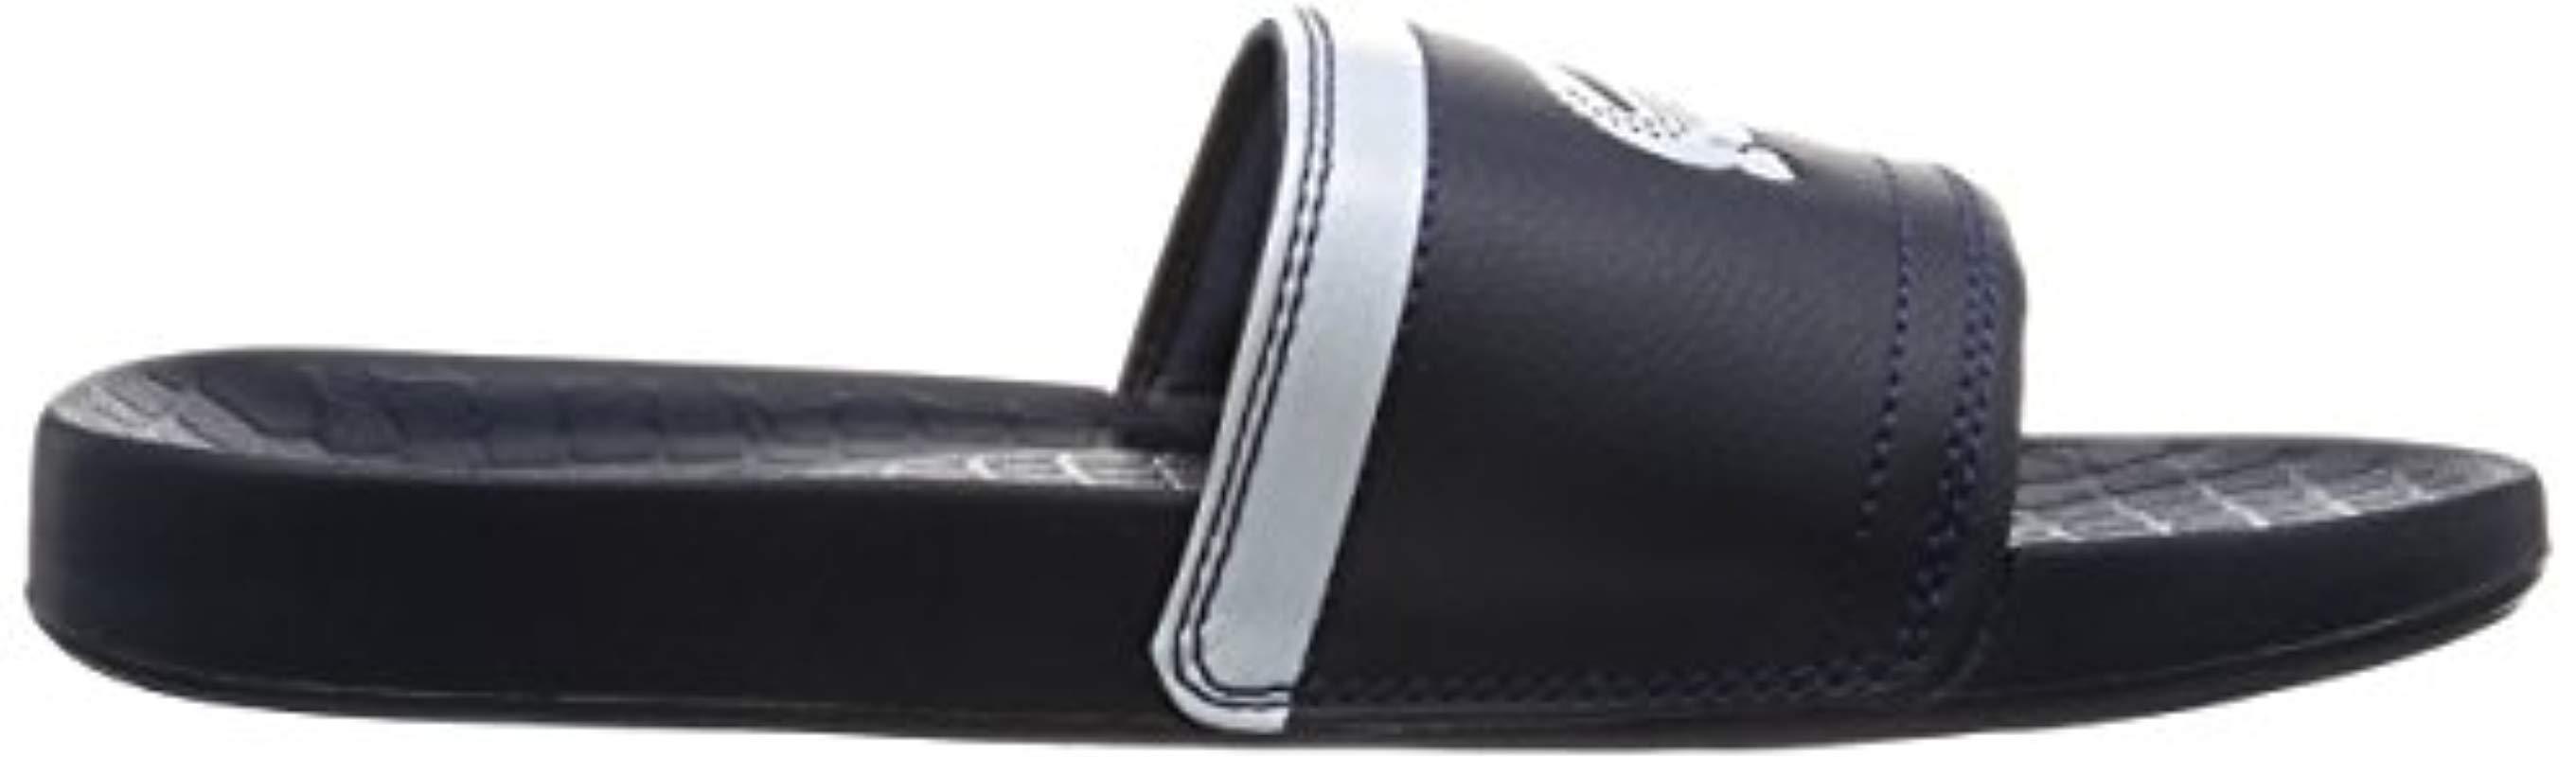 Lacoste Frasier Brd1 Pantoufles Homme Chaussures Chaussures homme  himzomuhely.hu